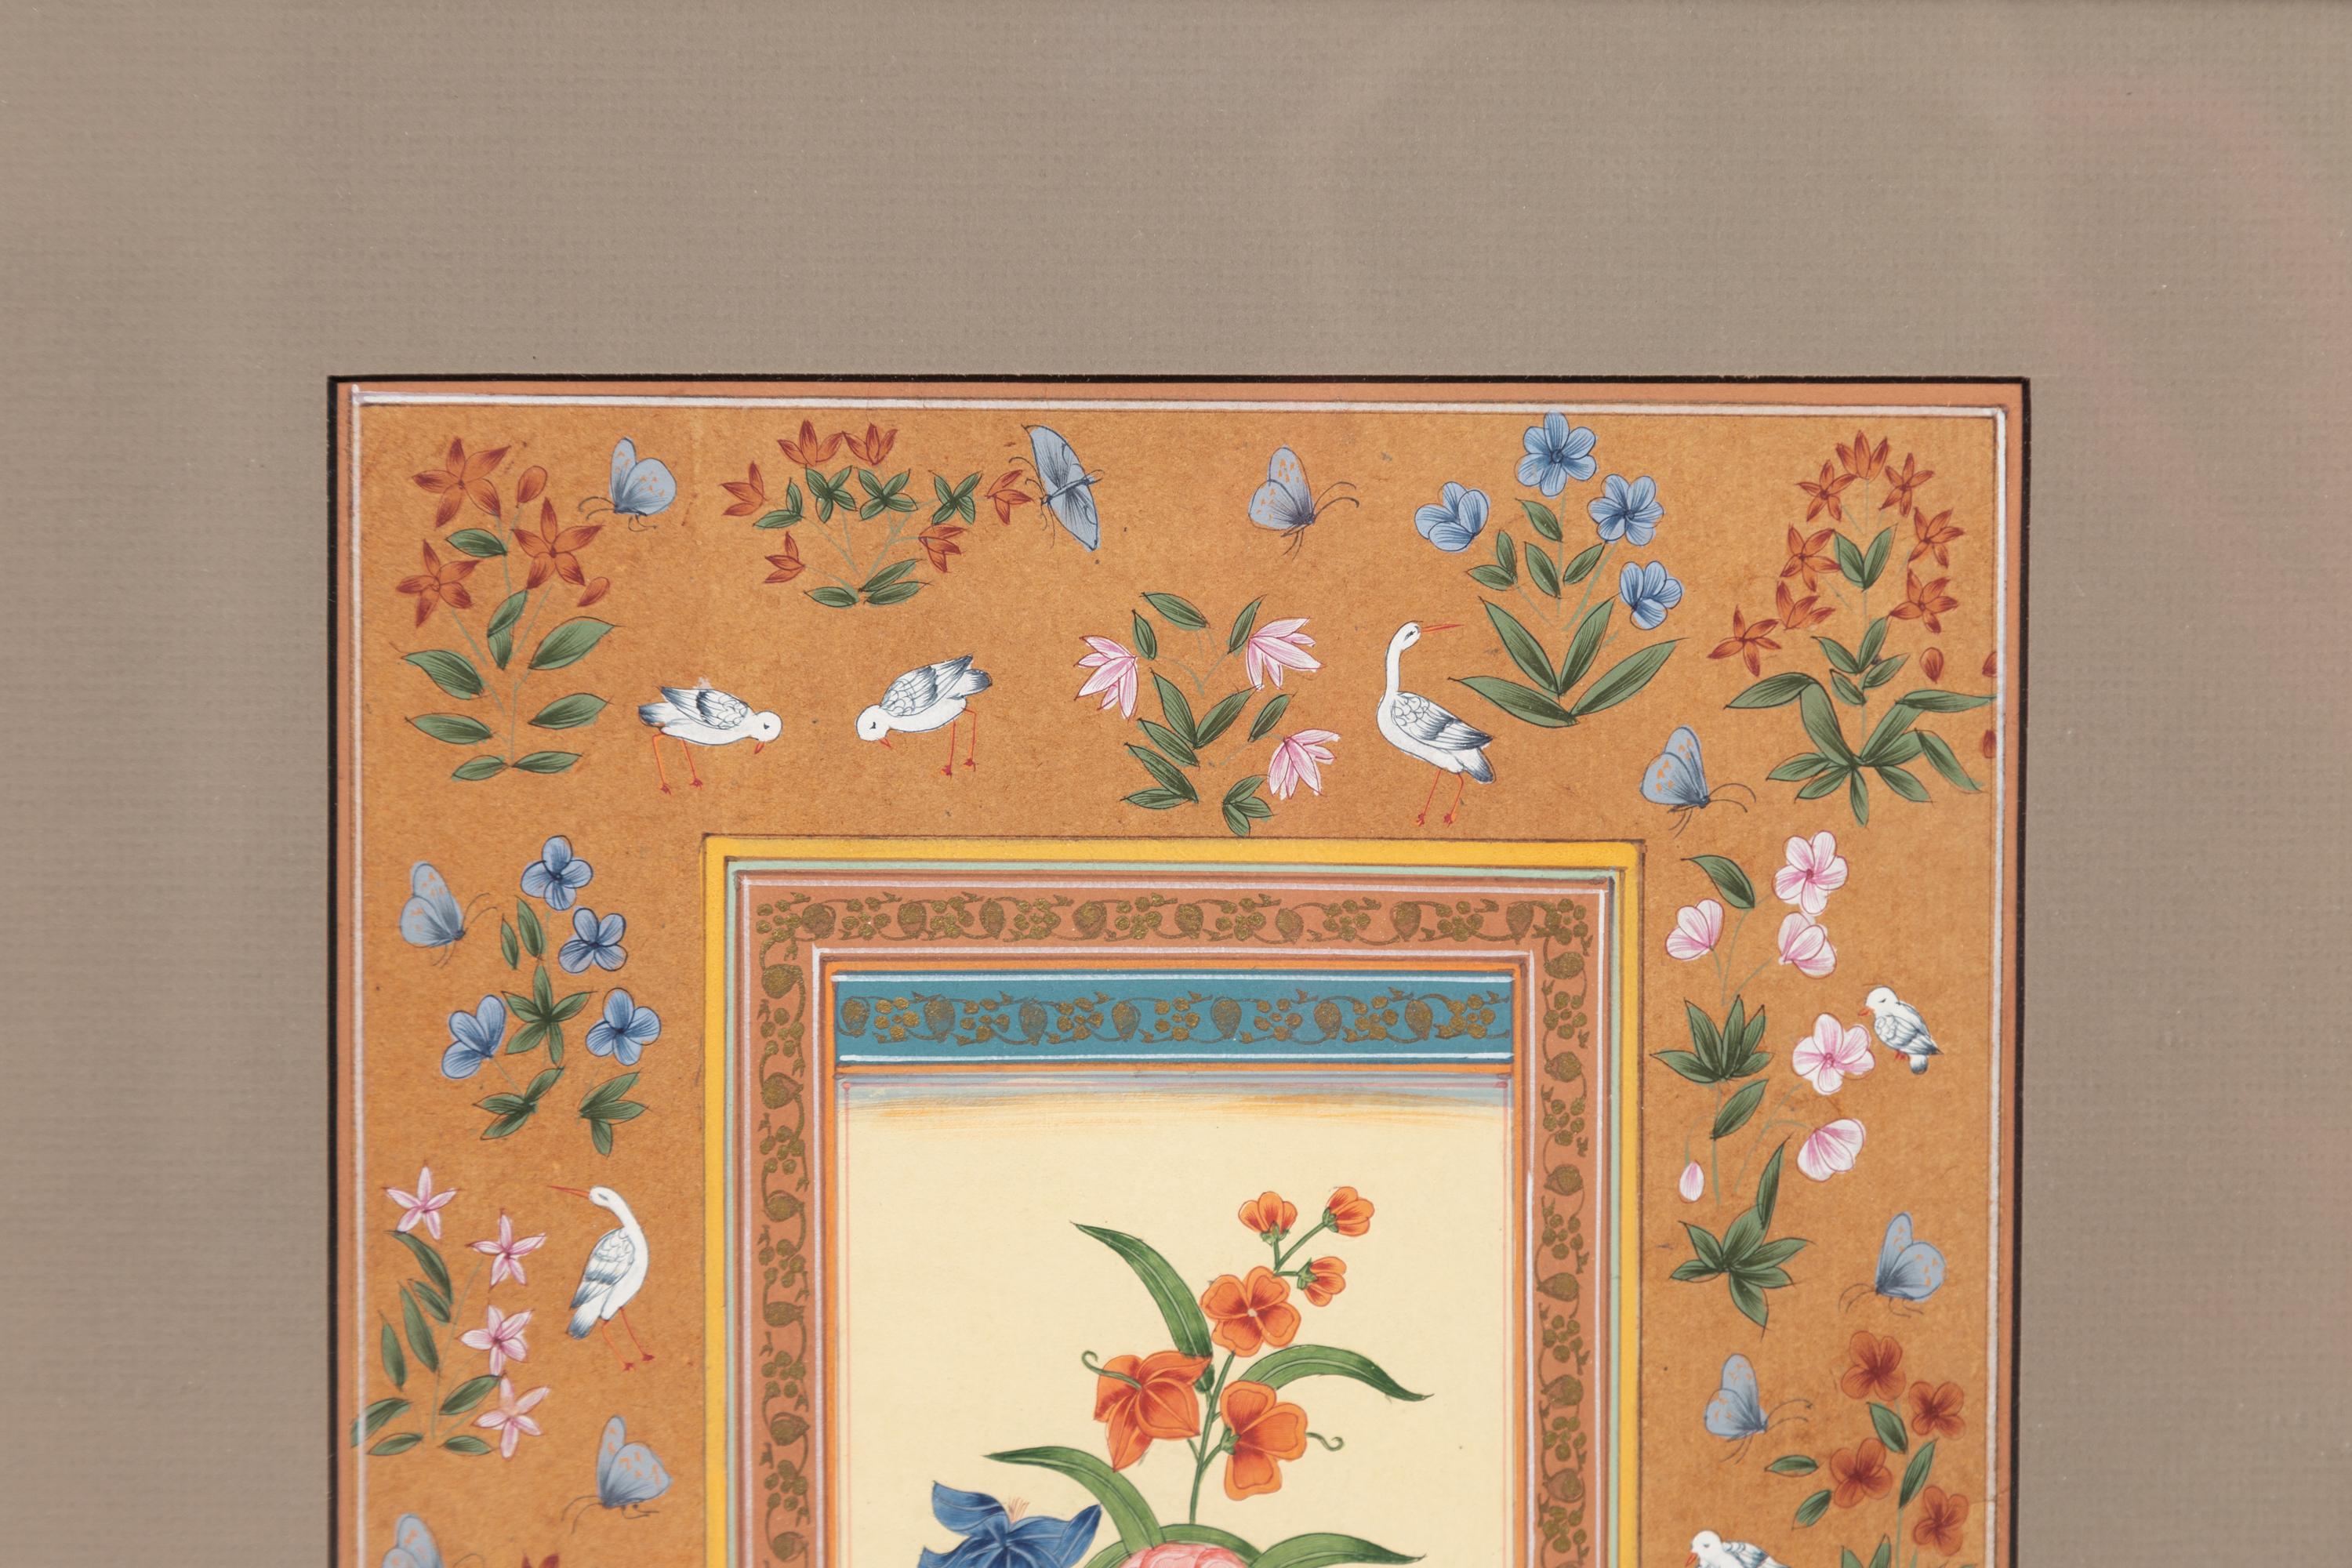 Paper Indian Floral Still-Life from the Midcentury Period with Flowers and Birds